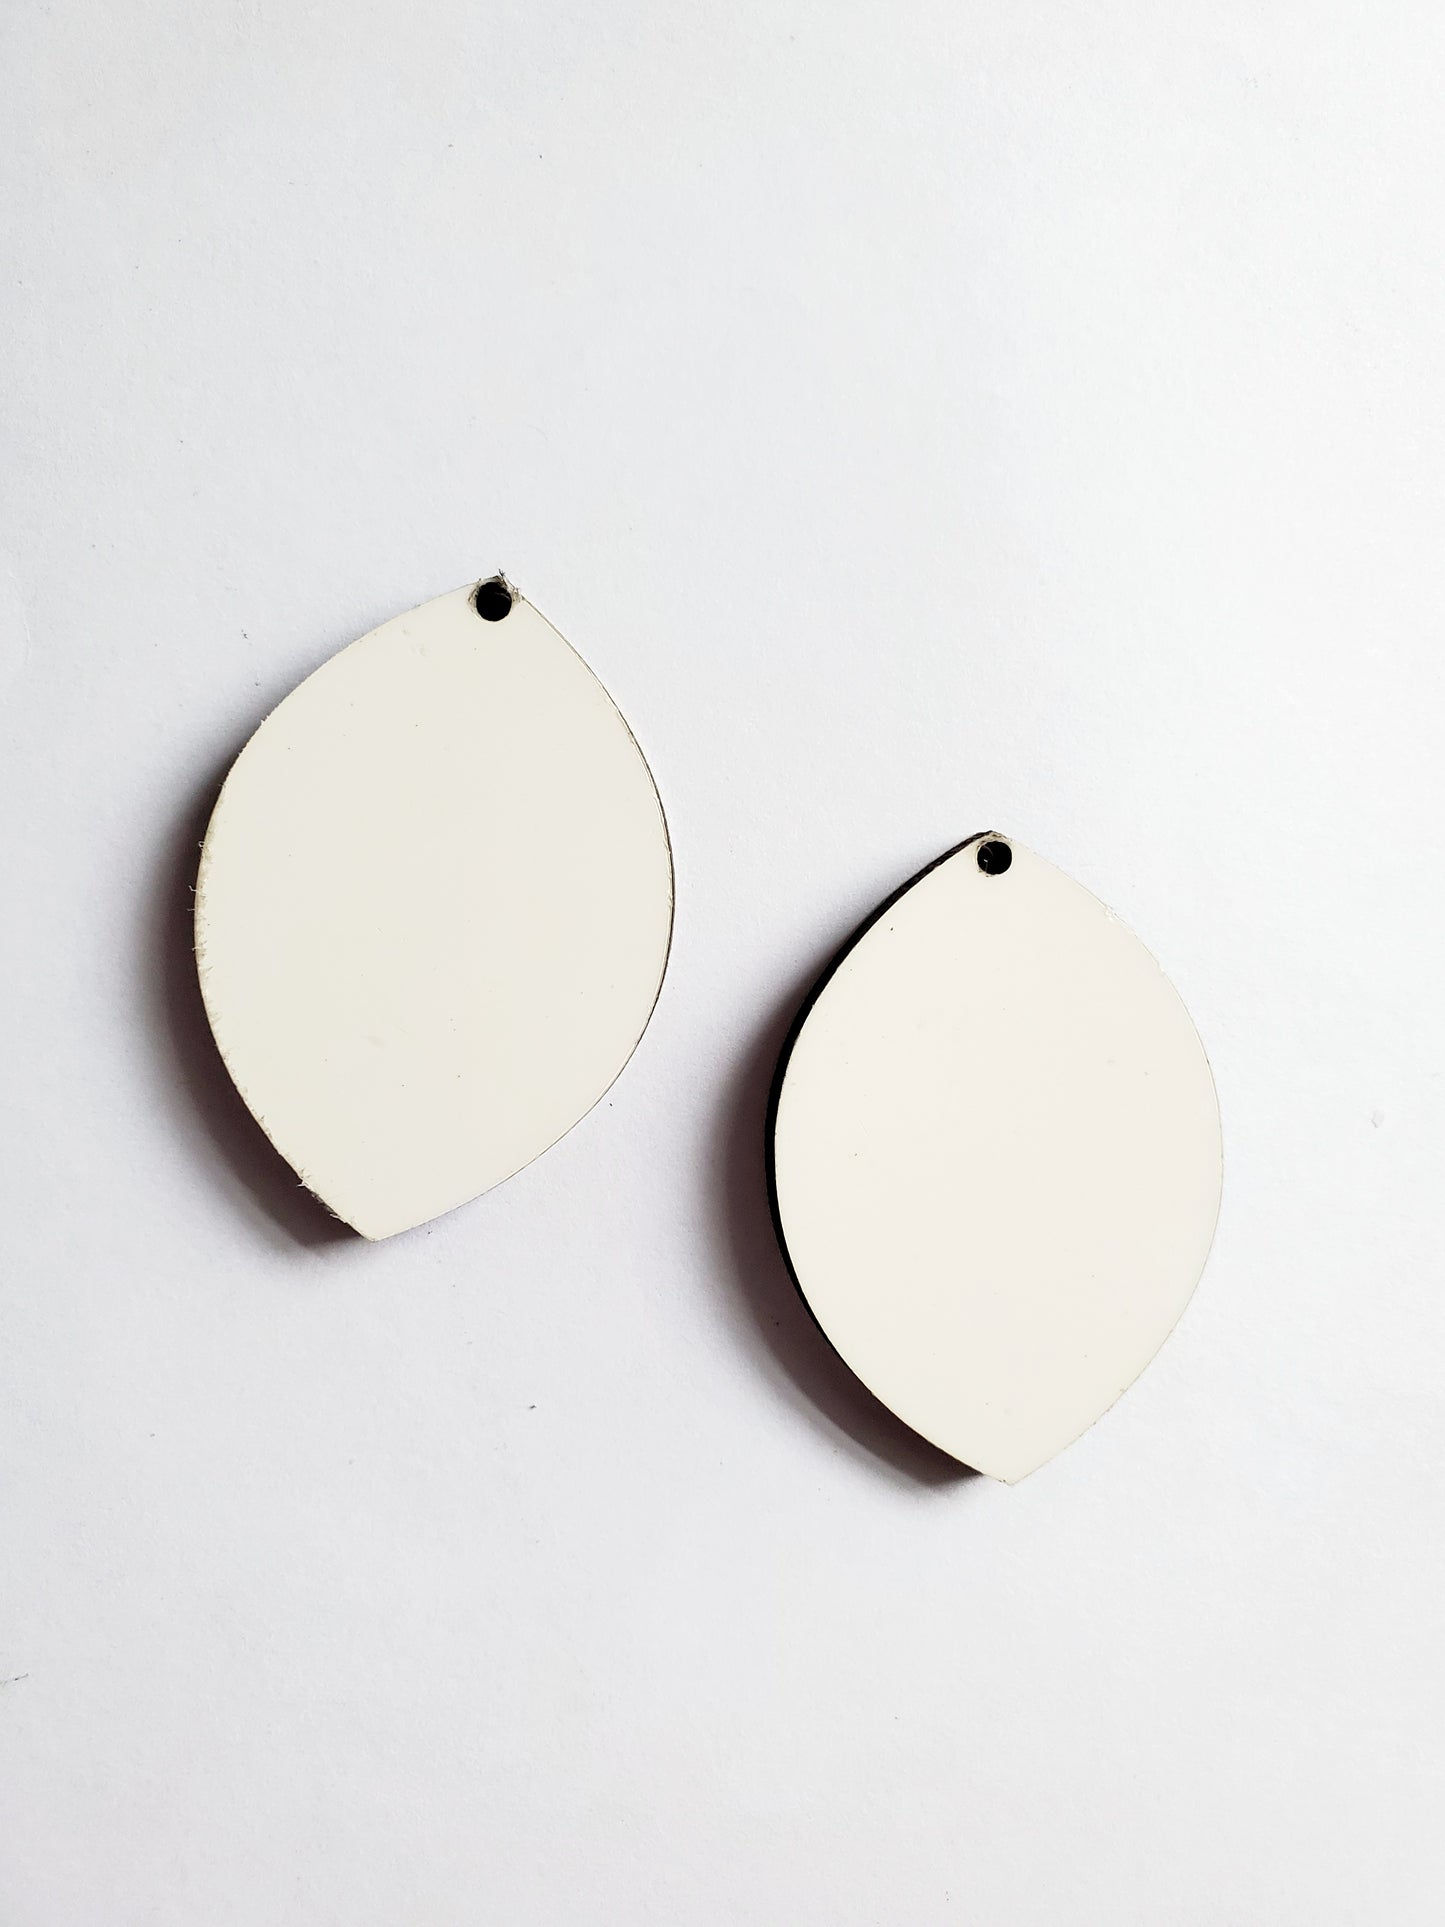 Pair of Leaf Shape 2-Sided MDF Sublimation Earrings with Hanging Hardware (set of 2). Laserable!